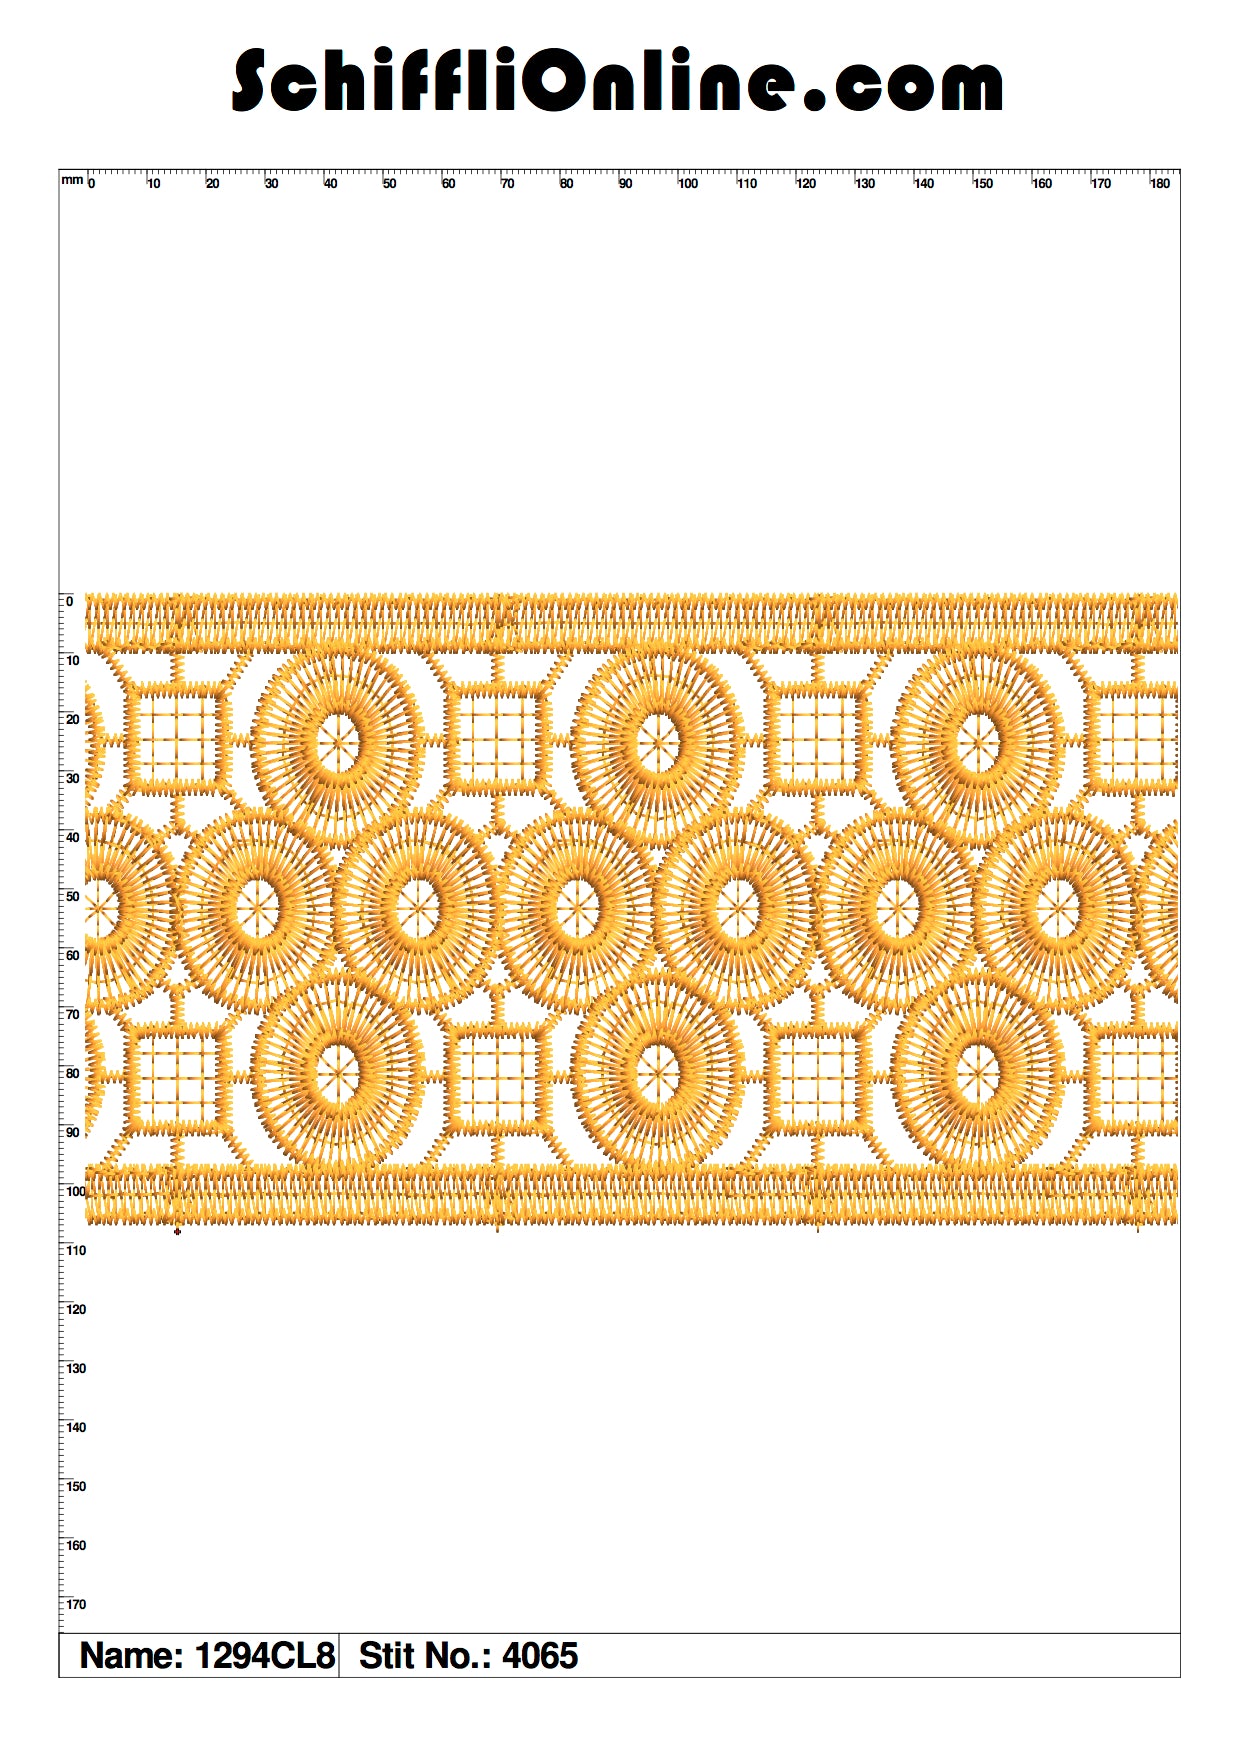 Book 142 CHEMICAL LACE 8X4 50 DESIGNS